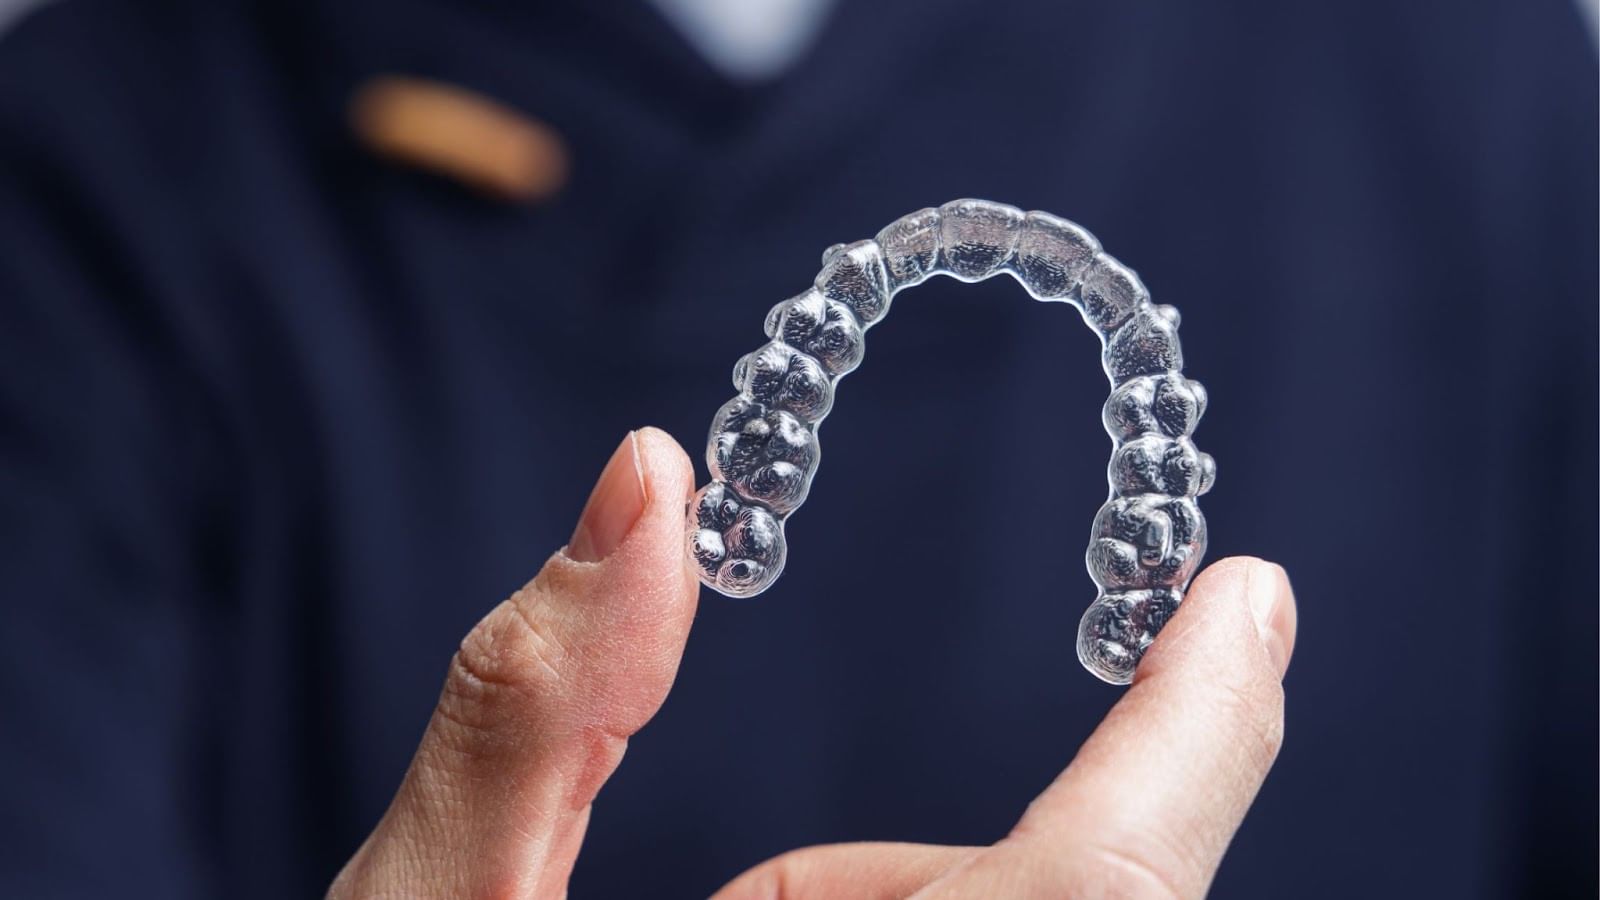 Clear Aligners Cost in India । Dr. Sachin Mittal